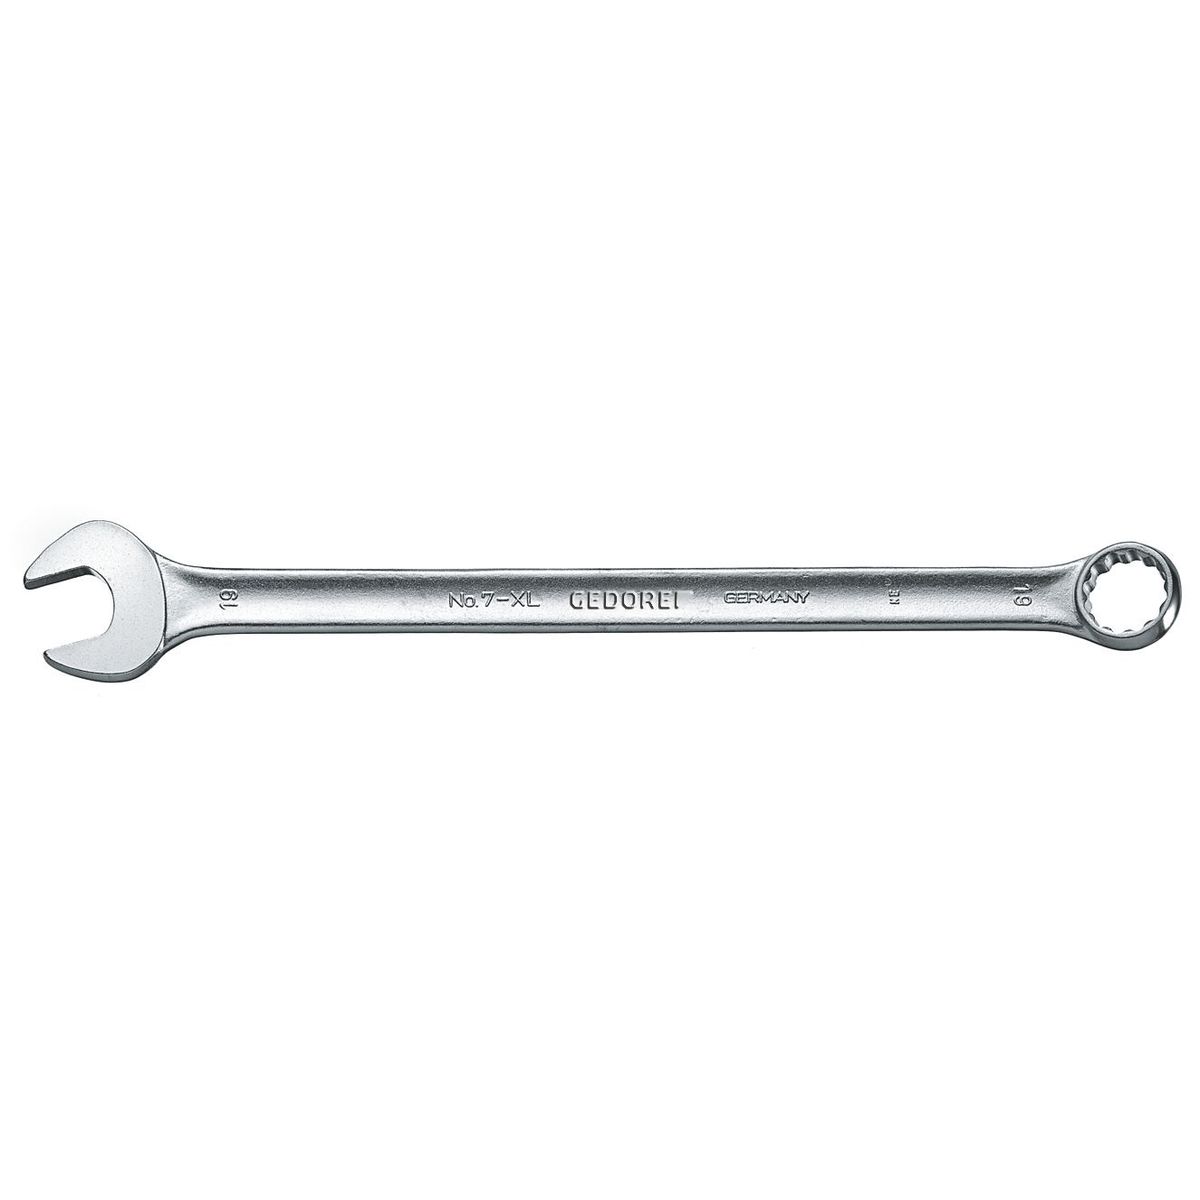 Combination spanner, extra long 18mm No.7 XL 18 Gedore